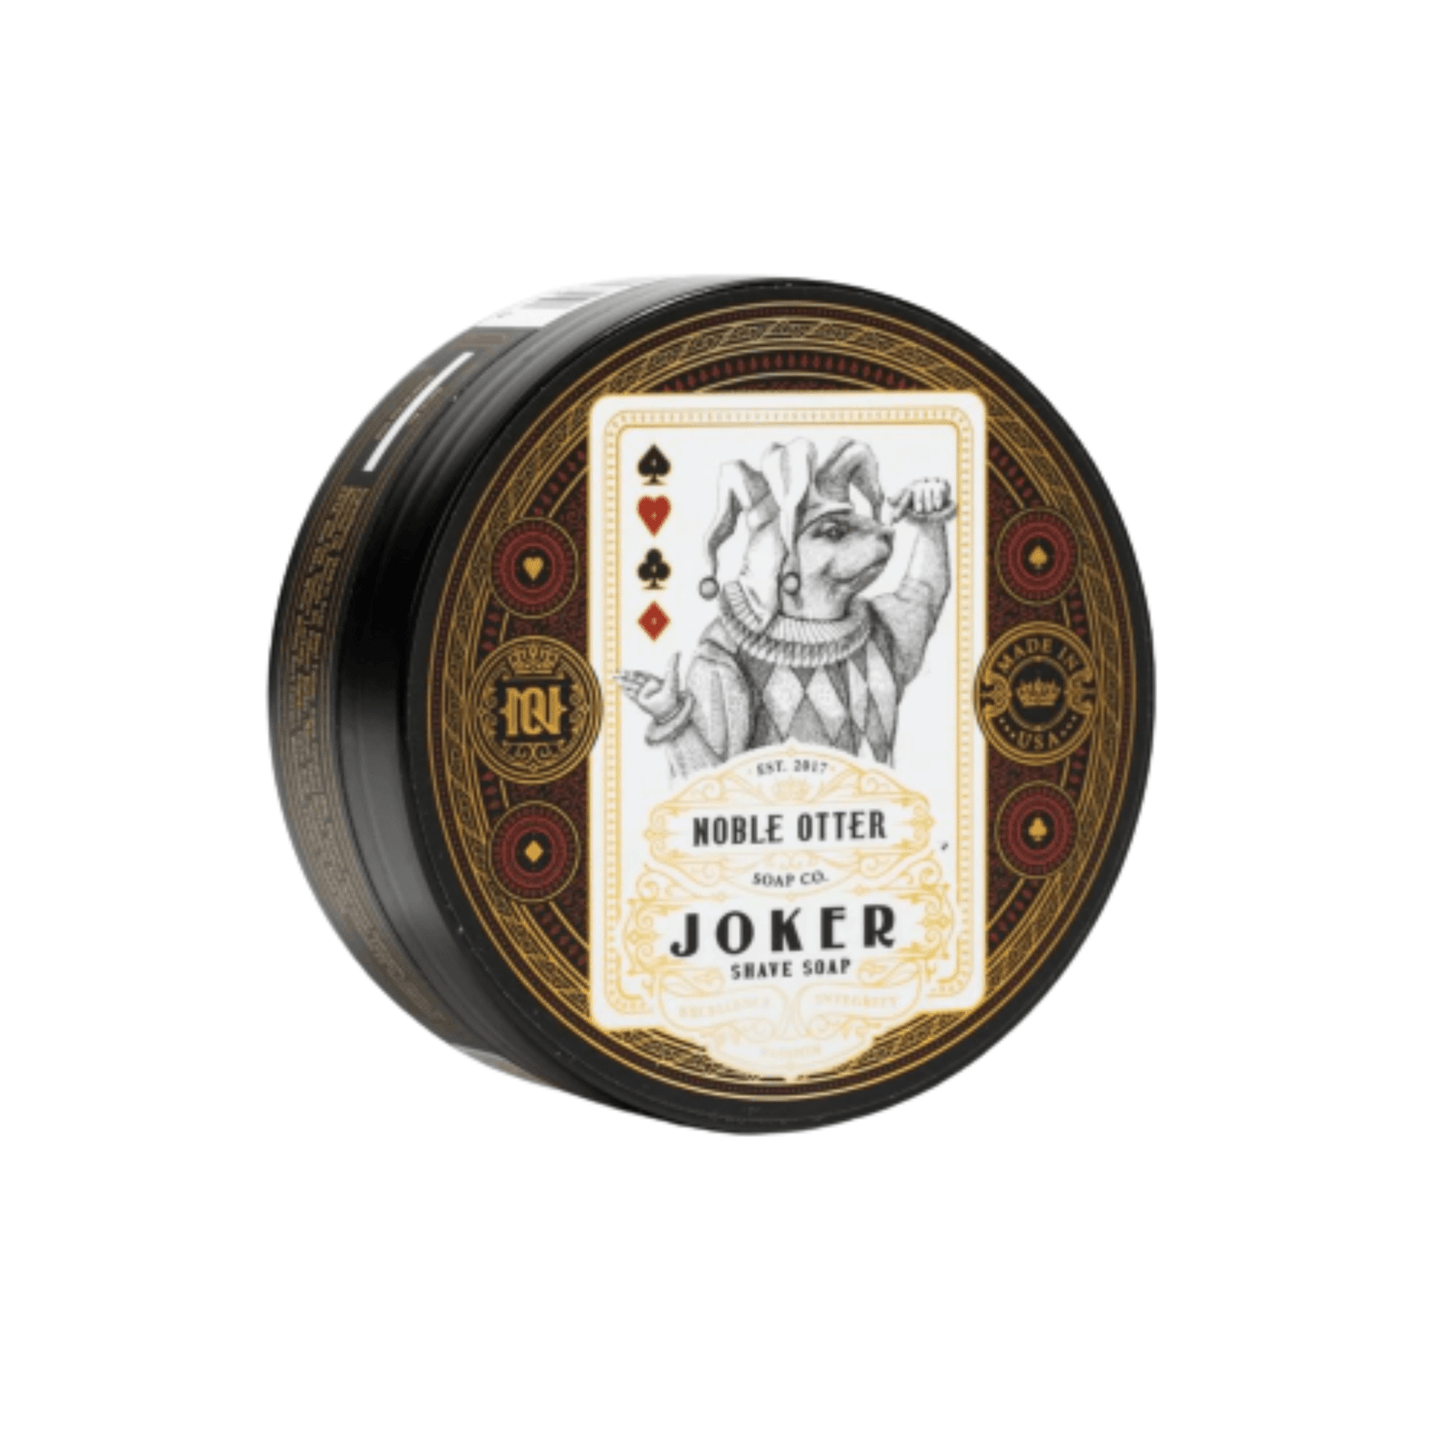 Primary Image of Joker Shave Soap